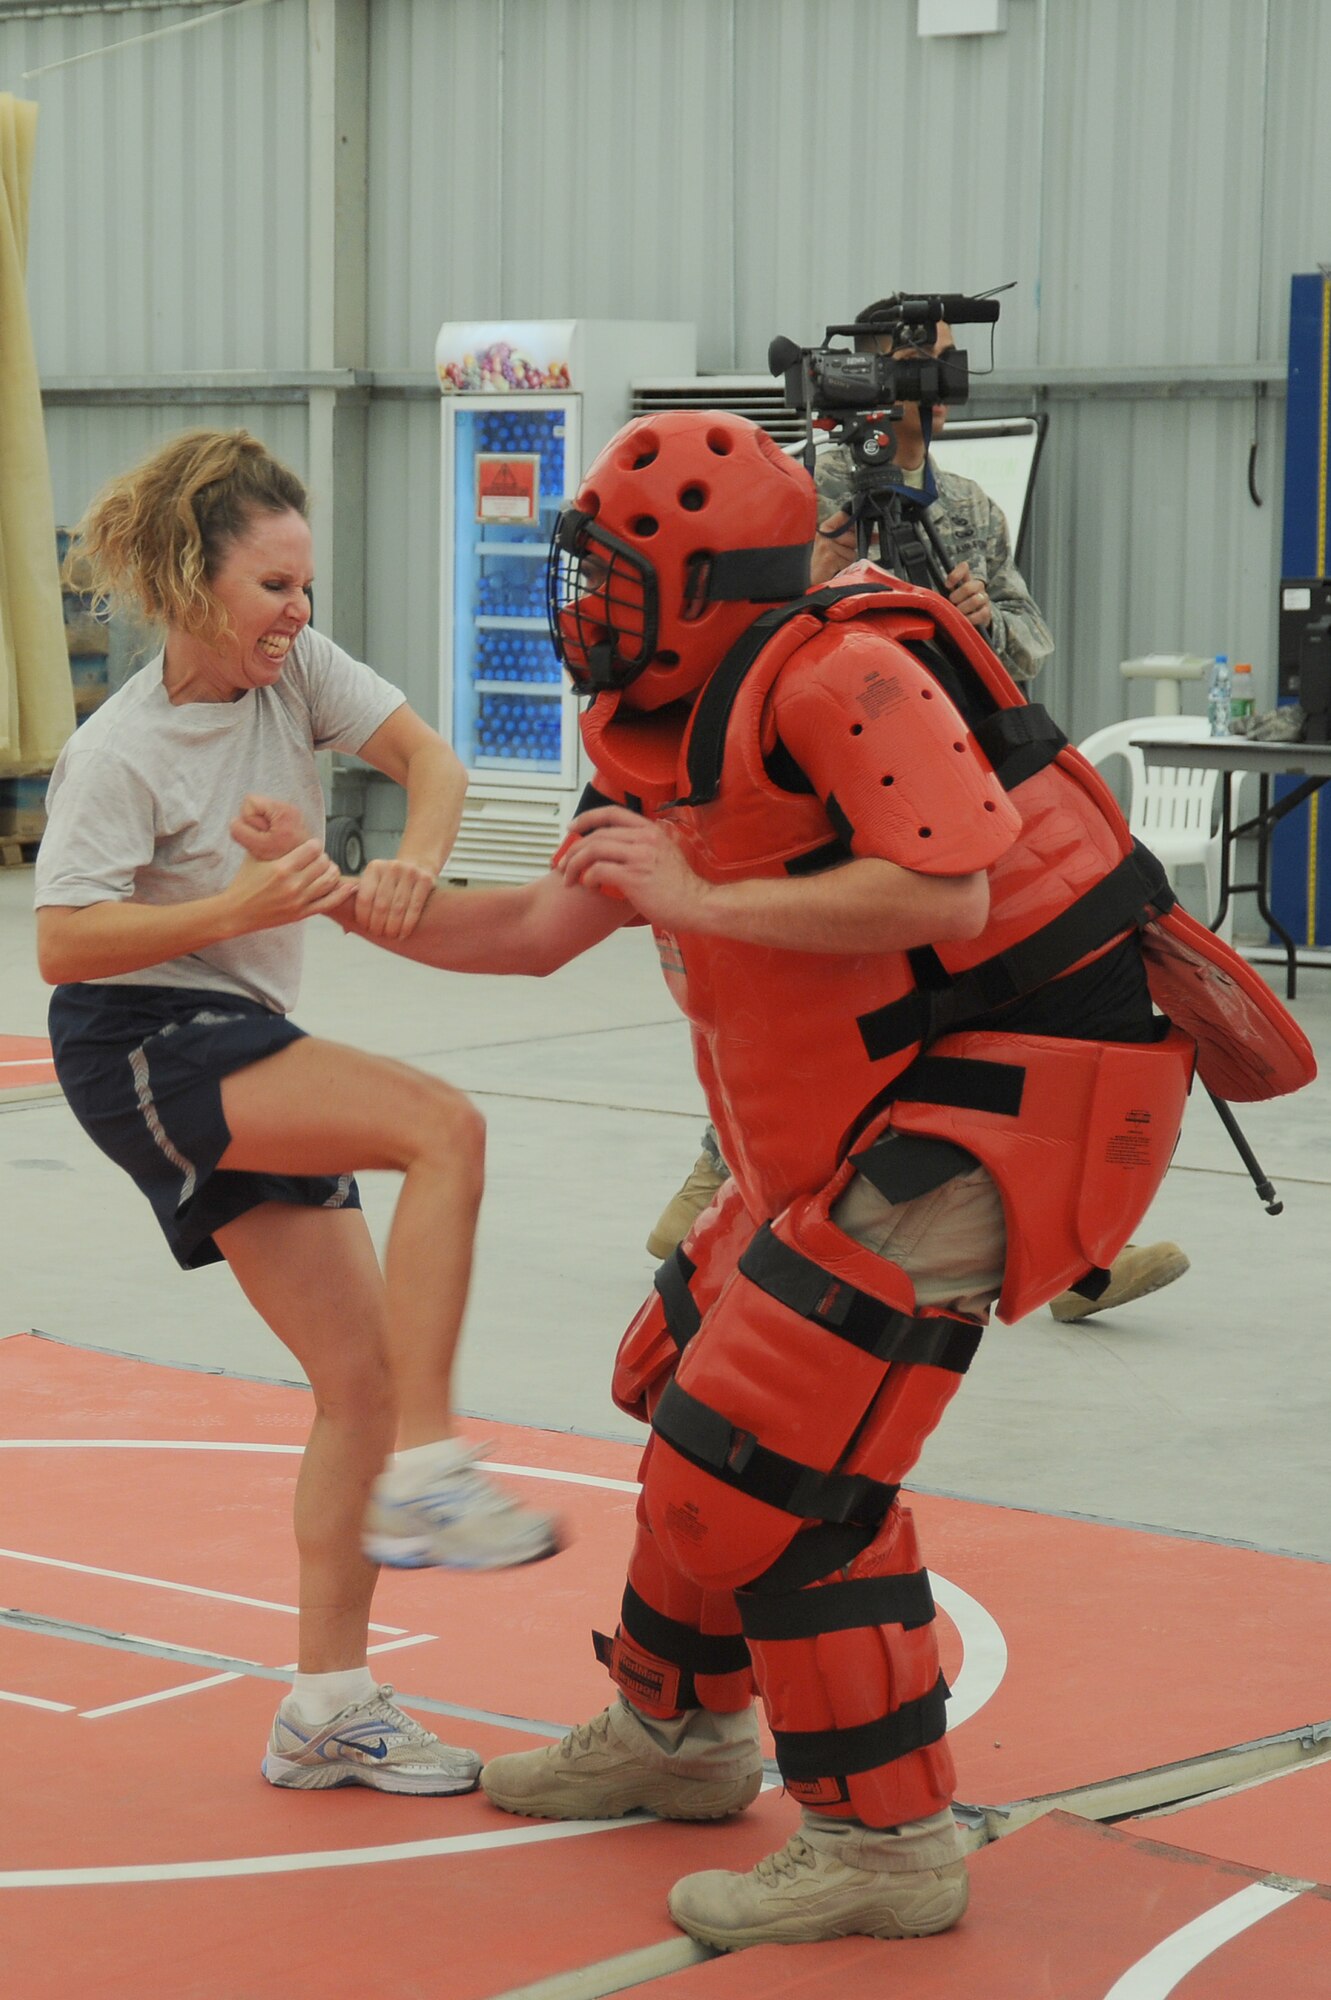 Capt. Sherry Souriolle, 380th Air Expeditionary Wing, Sexual Assault Response Coordinator, prepares to give a kick to the groin of an attacker played by Mr. Rick Baldwin, a Northrop Grumman contractor during self-defense training, April 18 at an undisclosed location in Southwest Asia. The Sexual Assault Response Coordinator (SARC) sponsored the training that gave students the chance to learn techniques to defend themselves from attack. Captain Souriolle is deployed from Los Angeles AFB, Calif. and hails from San Diego, Calif. (U.S. Air Force photo by Senior Airman Brian J. Ellis) (Released)